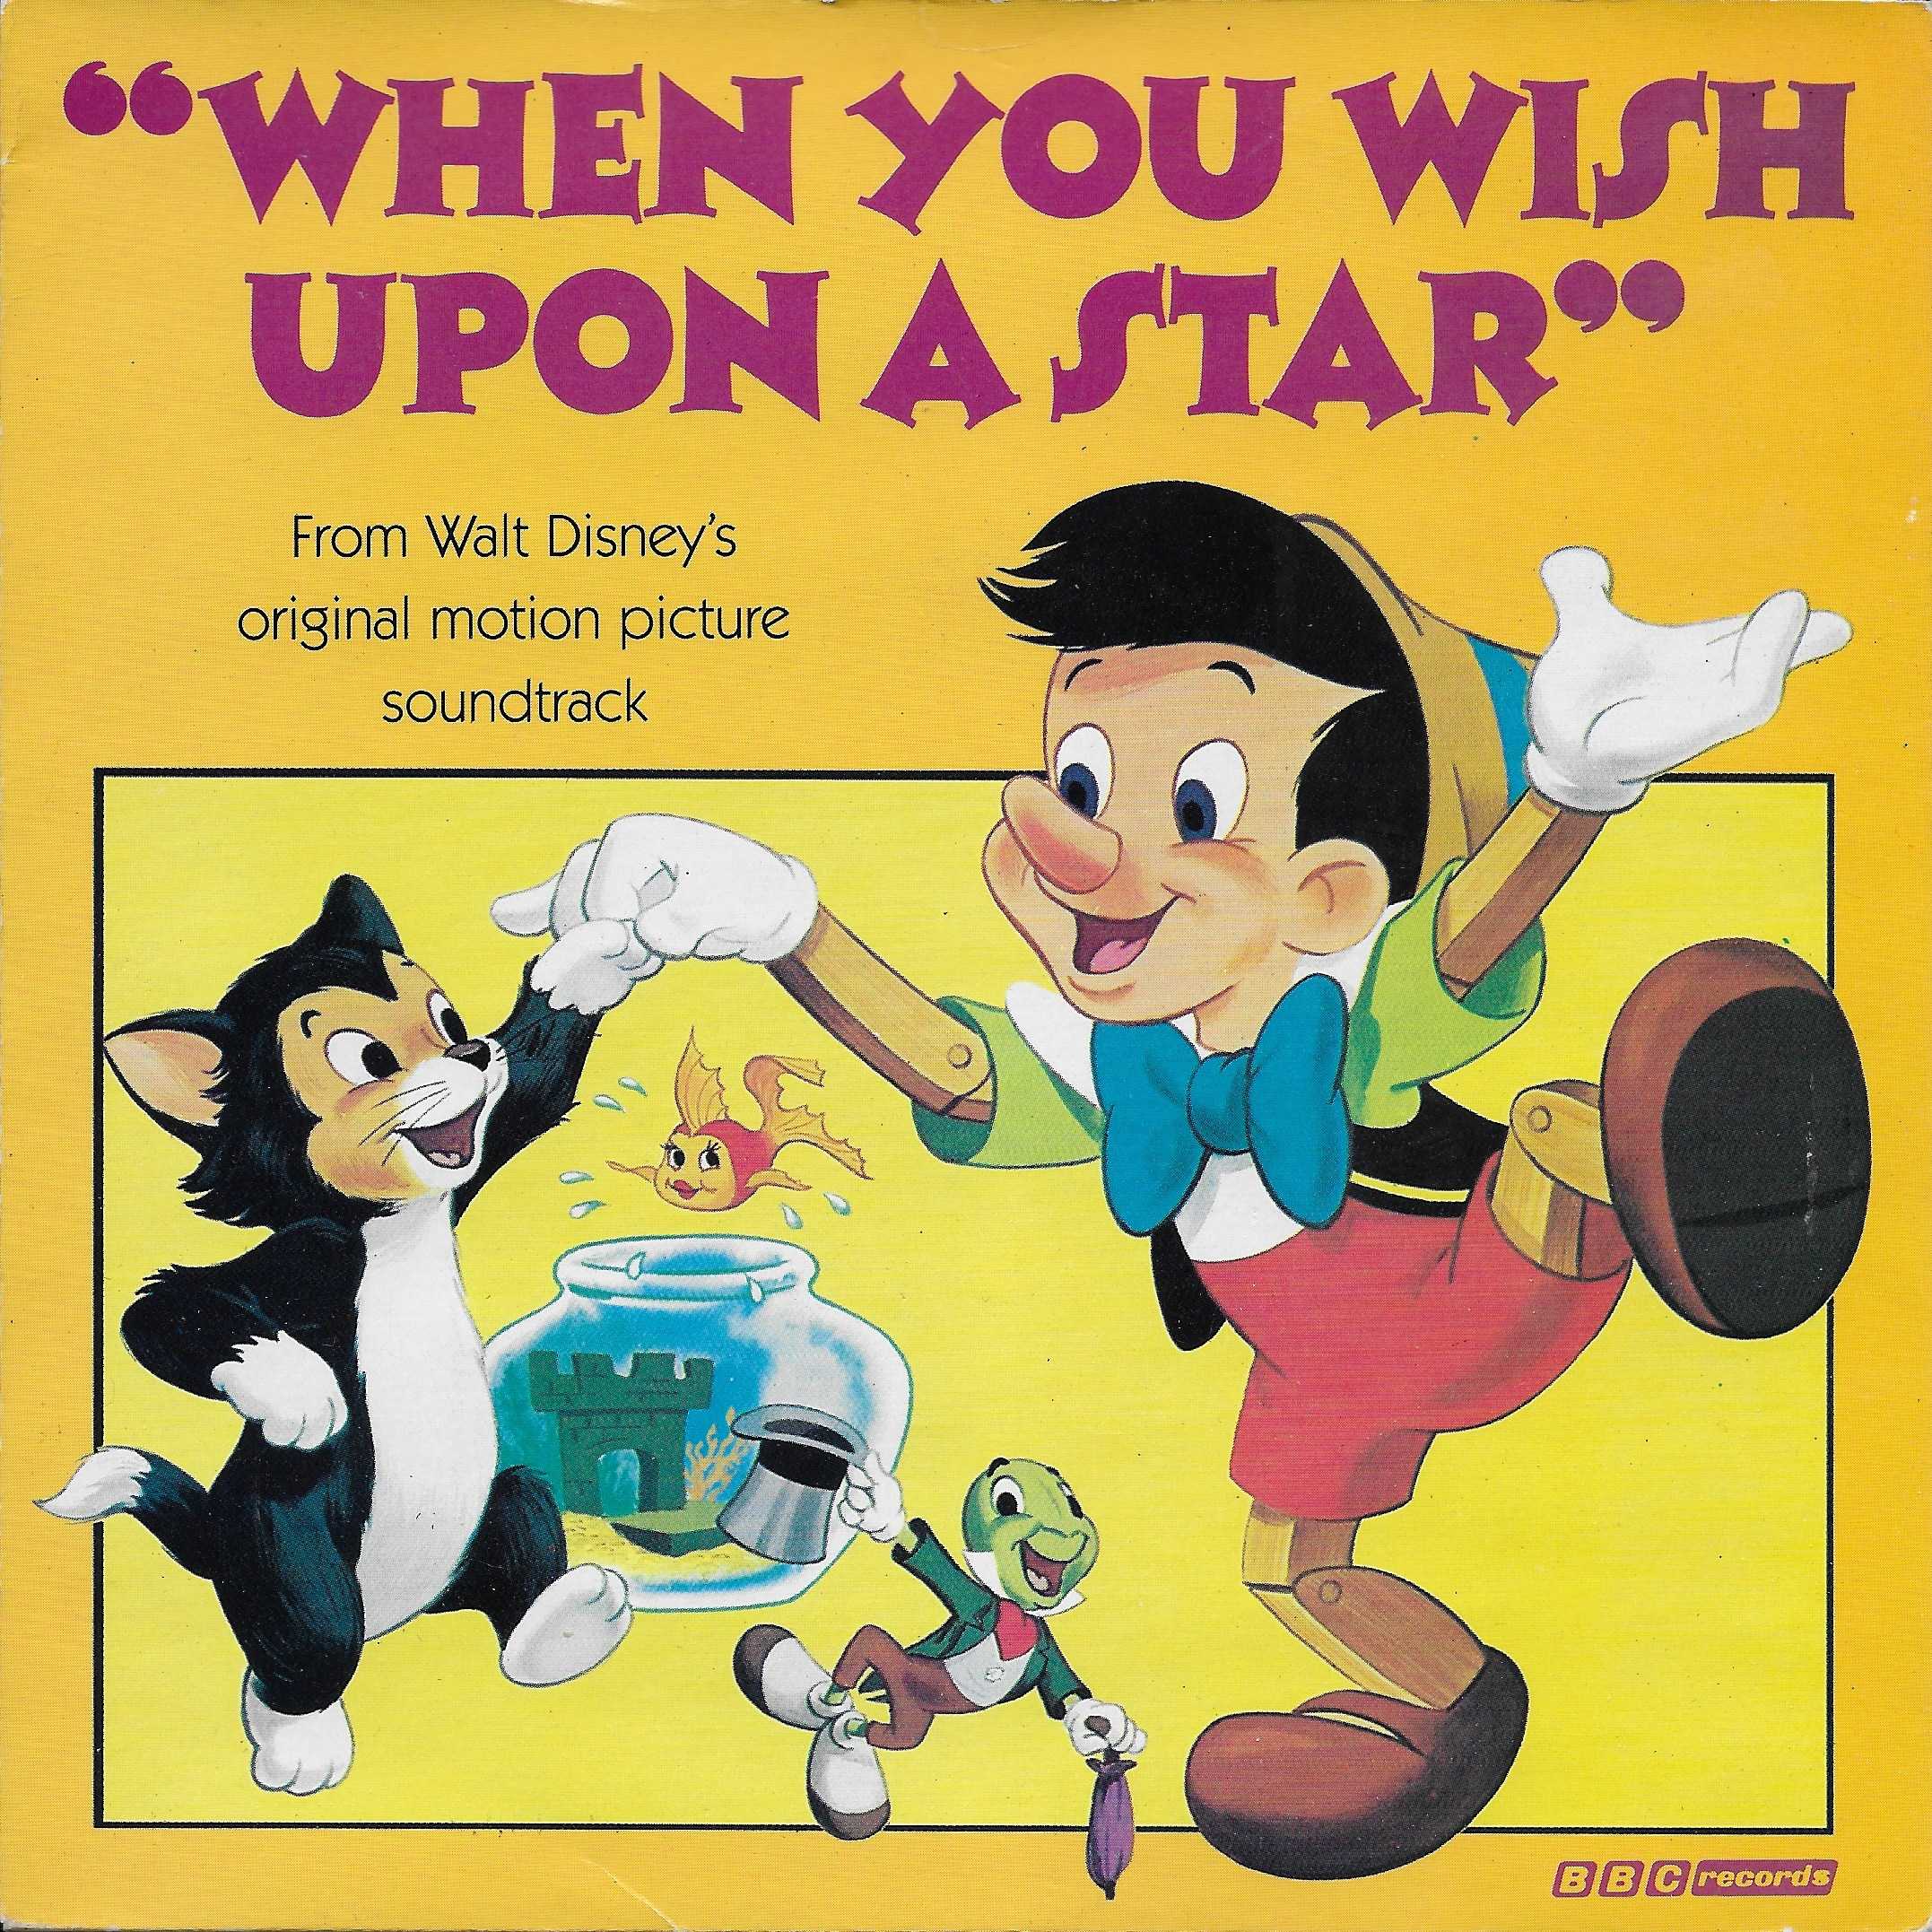 Picture of RESL 197 When you wish upon a star by artist Washington / Harline (Pinocchio - Jiminy Cricket) from the BBC singles - Records and Tapes library